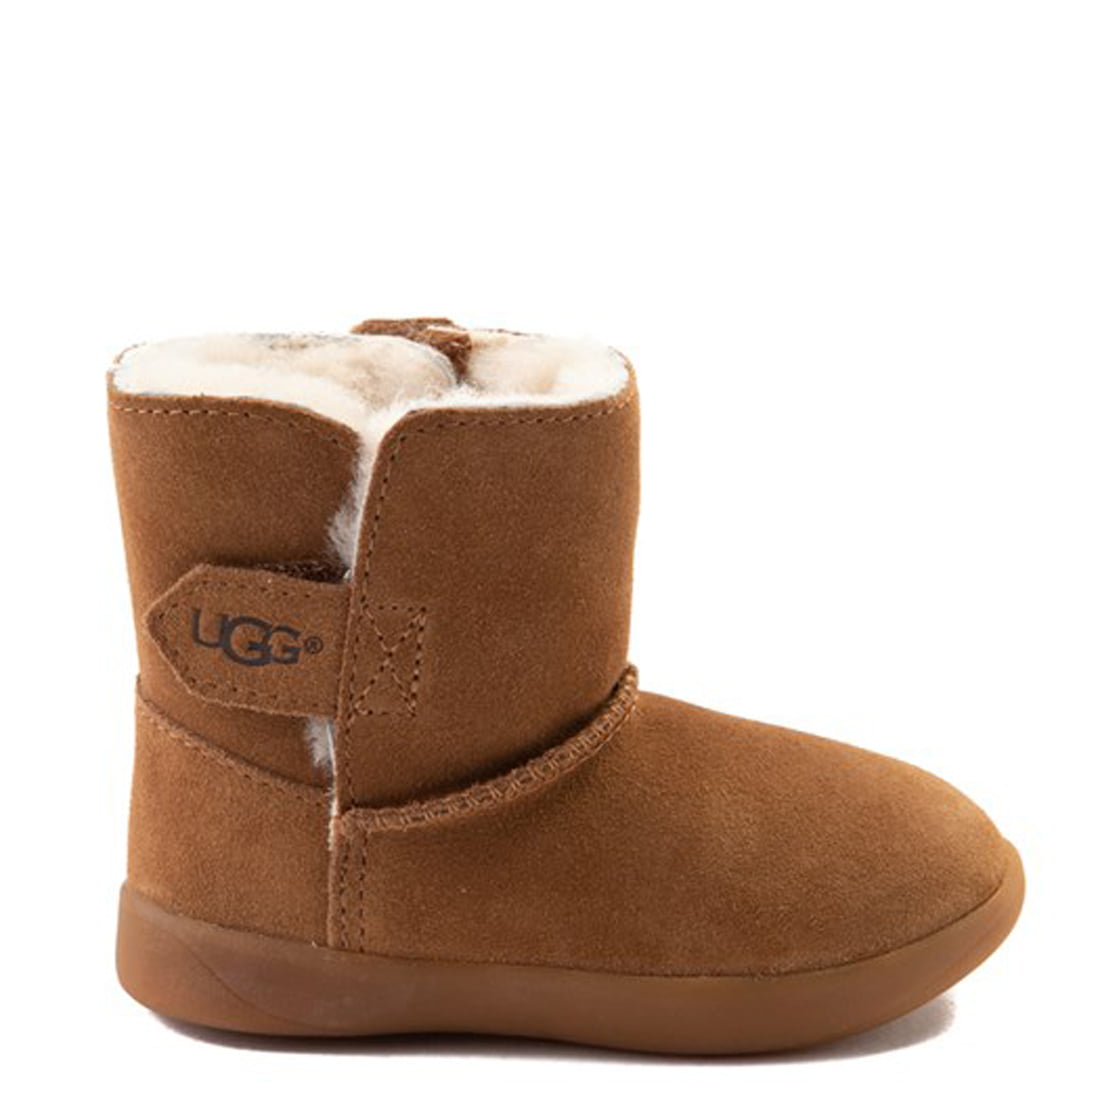 uggs for toddlers size 5